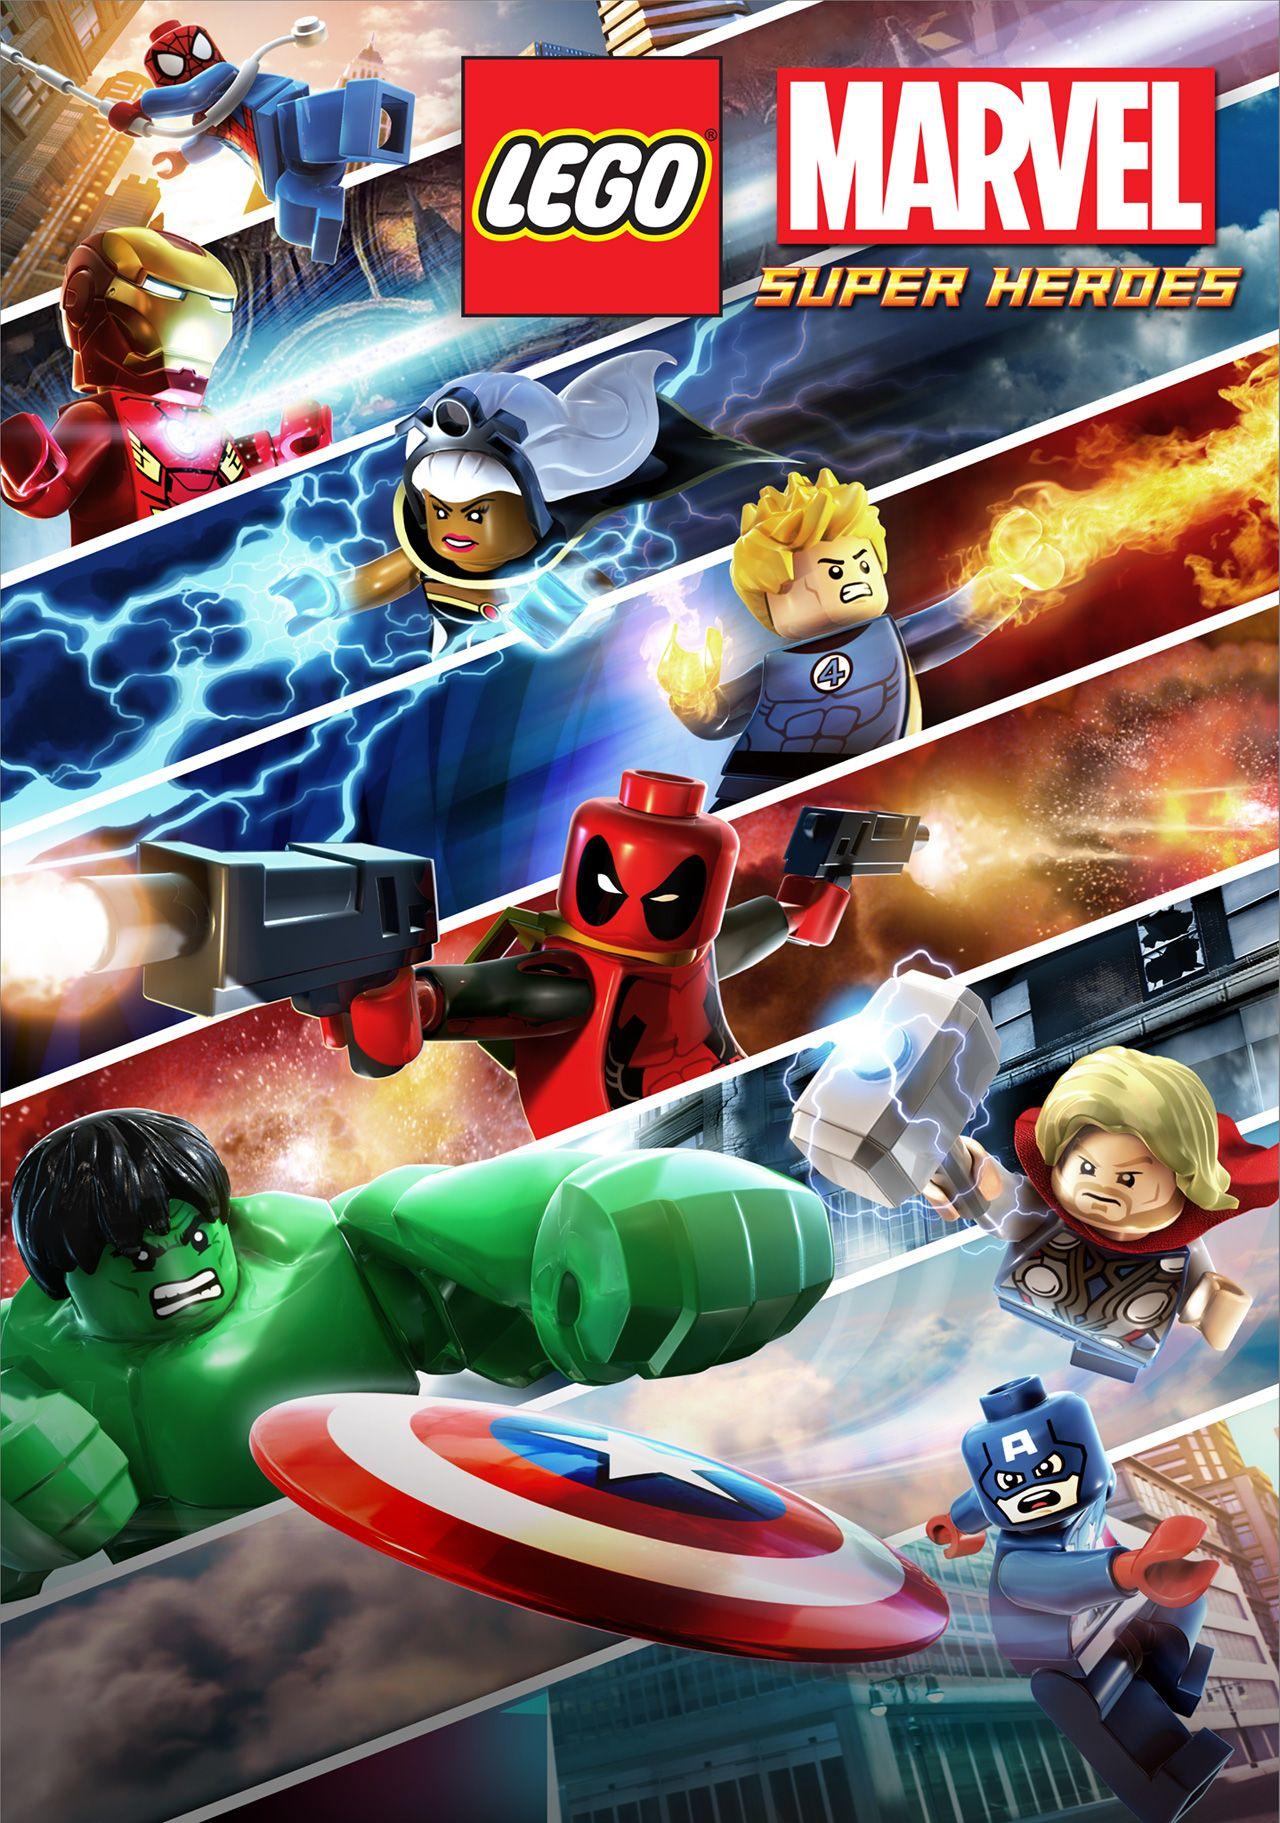 The New Poster for LEGO Marvel Super Heroes